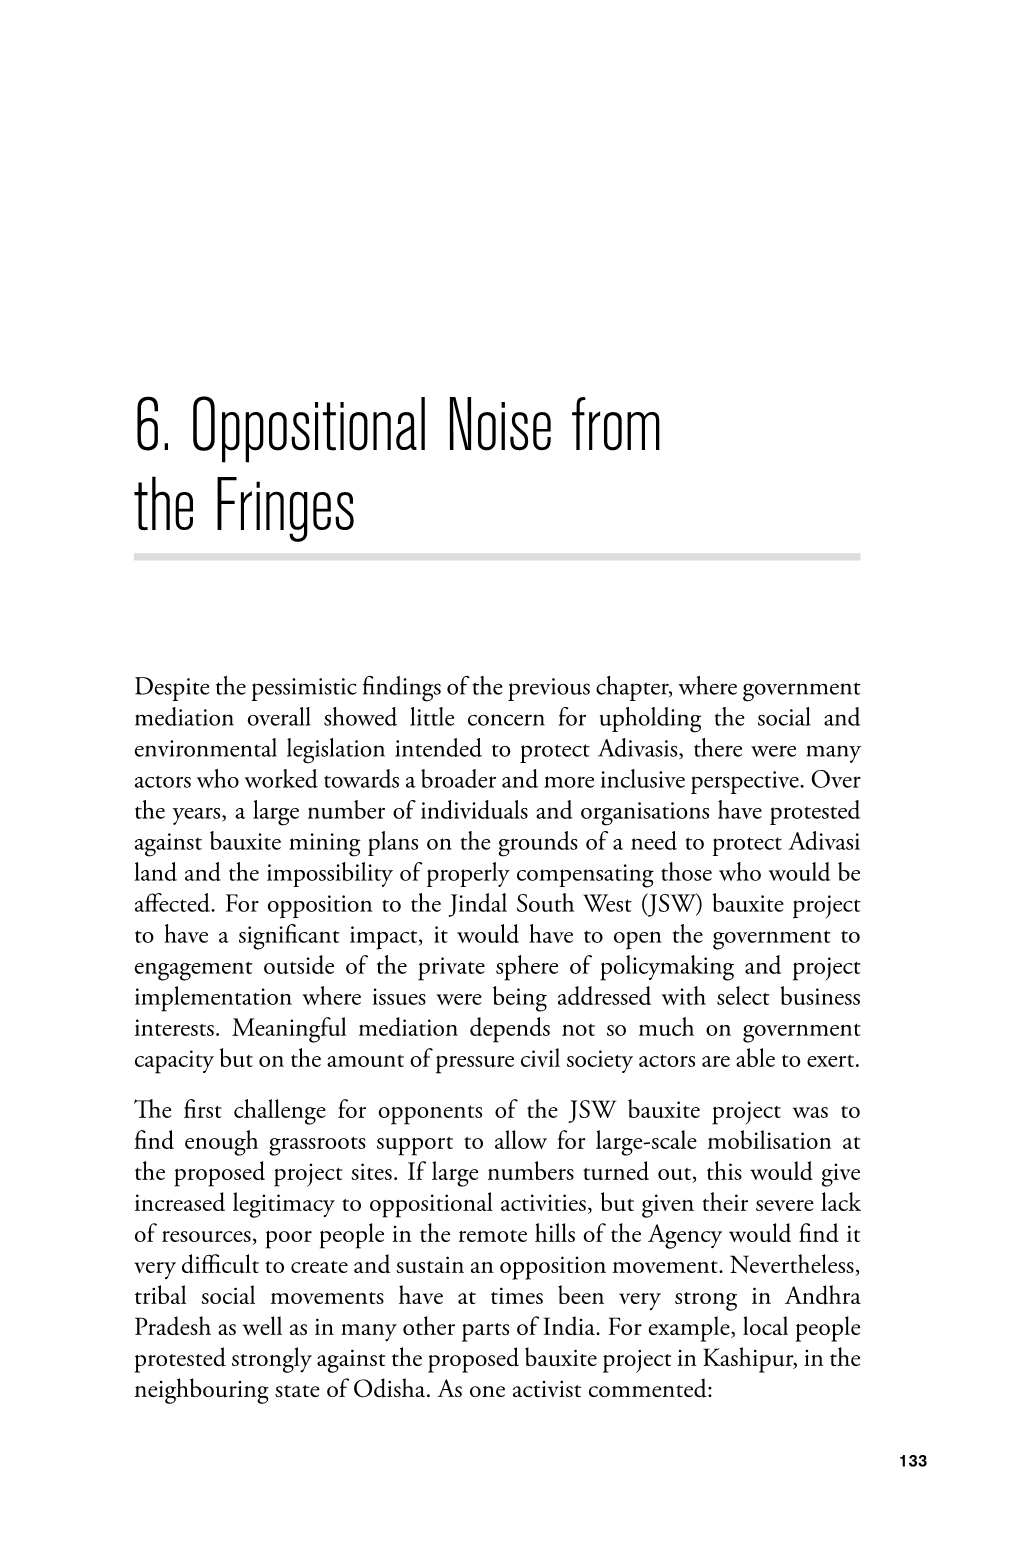 6. Oppositional Noise from the Fringes